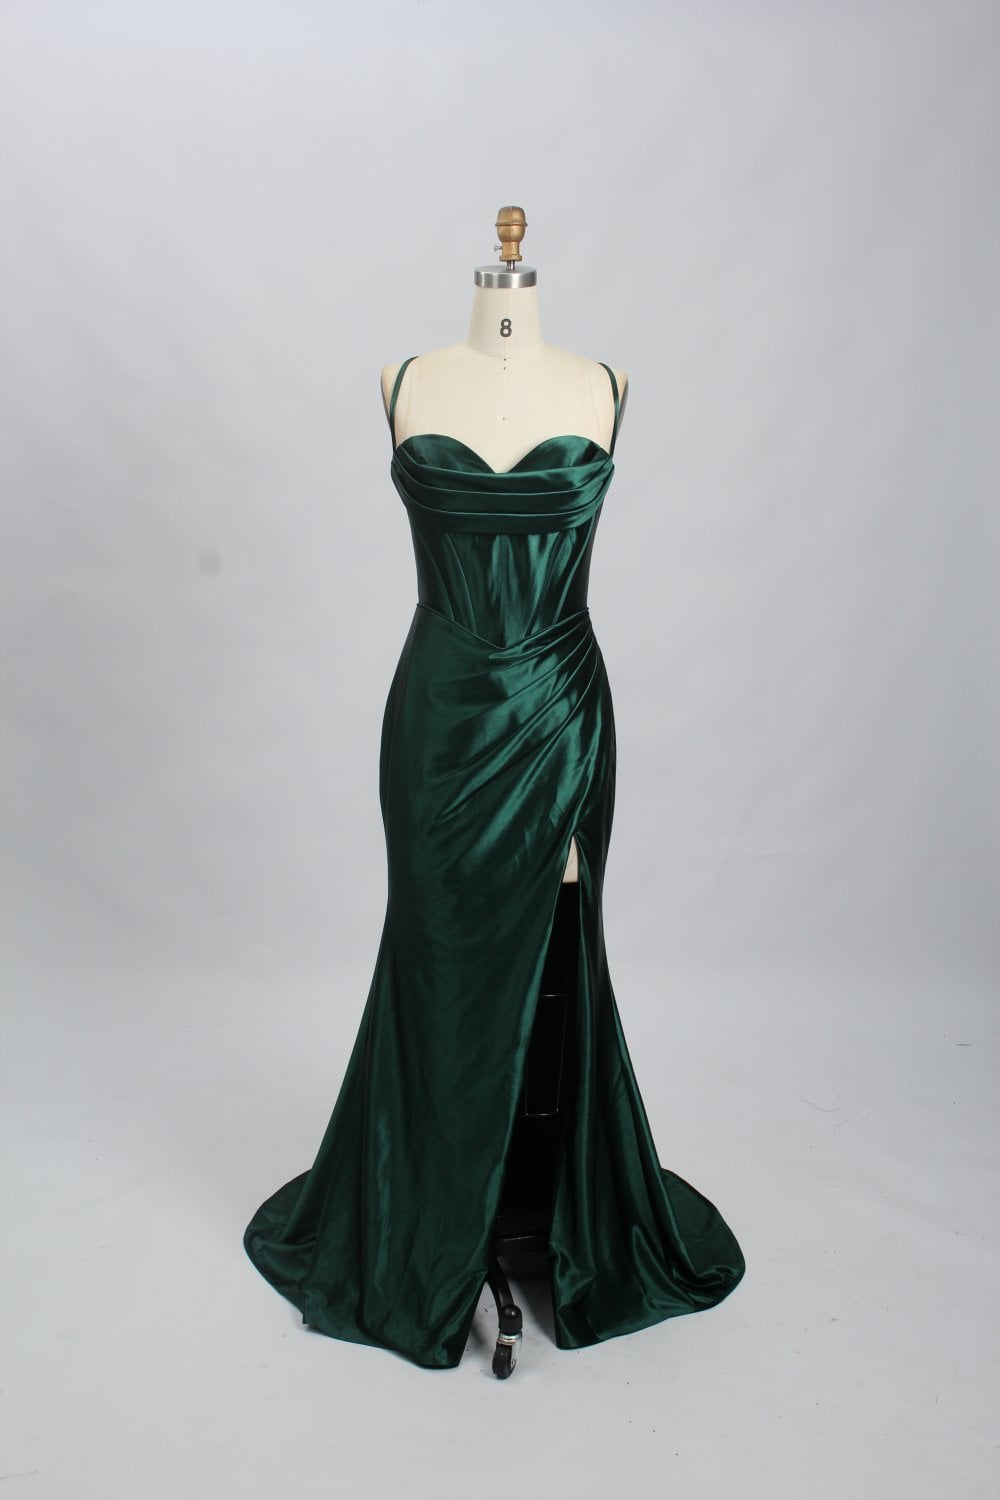 Bottle Green Gown Enhanced in Floral Designed Laces and Sequins|Gowns -Diademstore.com